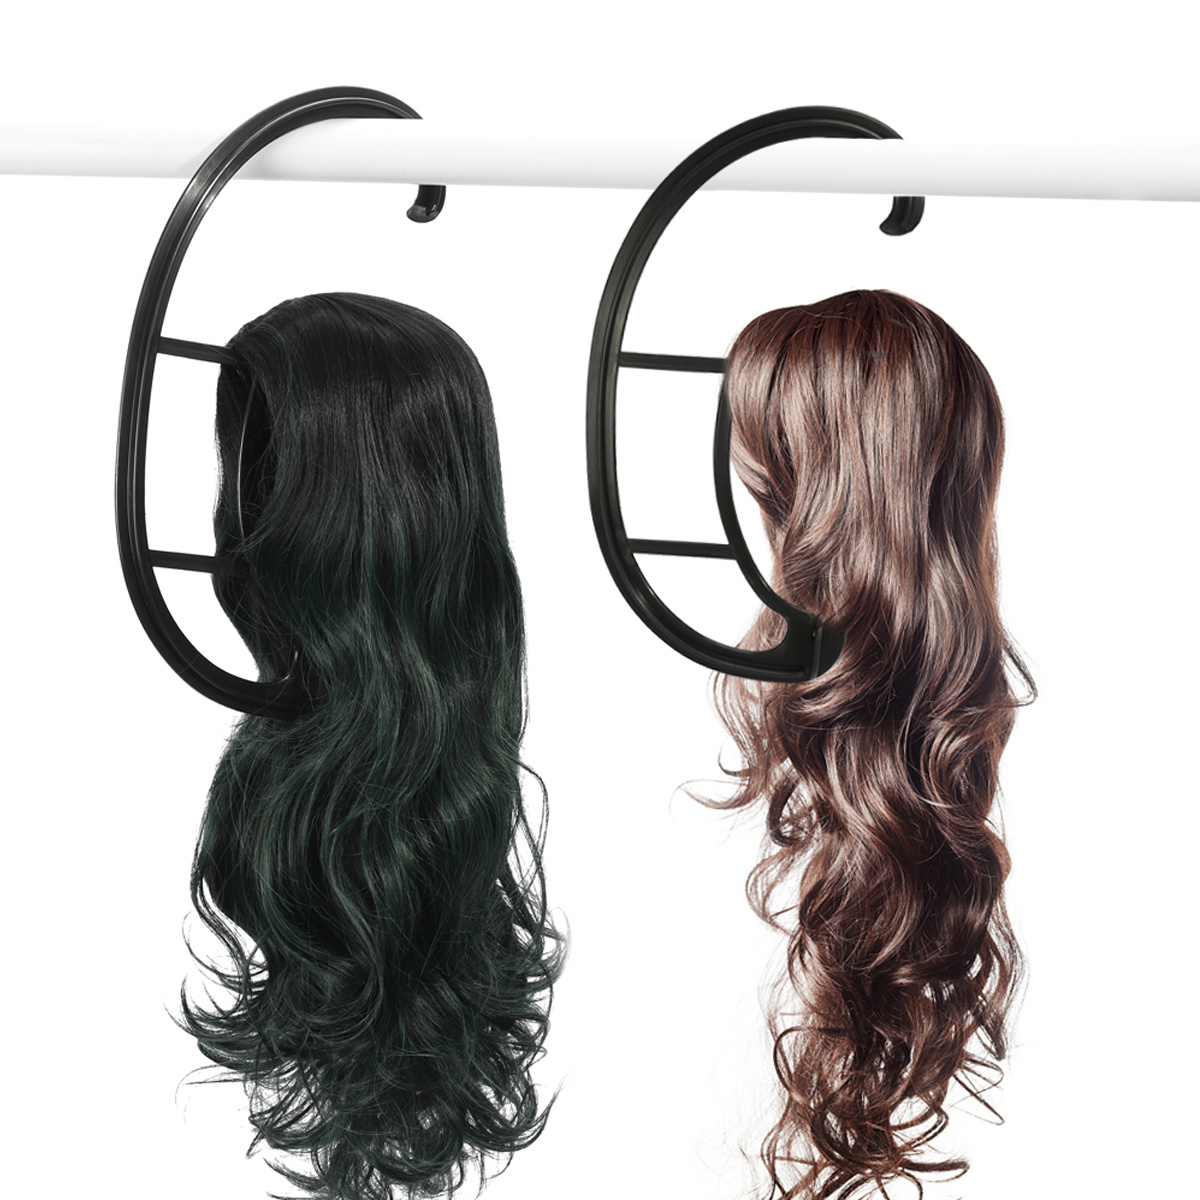 2pcs Wig Stand Folding Professional Wigs Hanger Wig Styling For